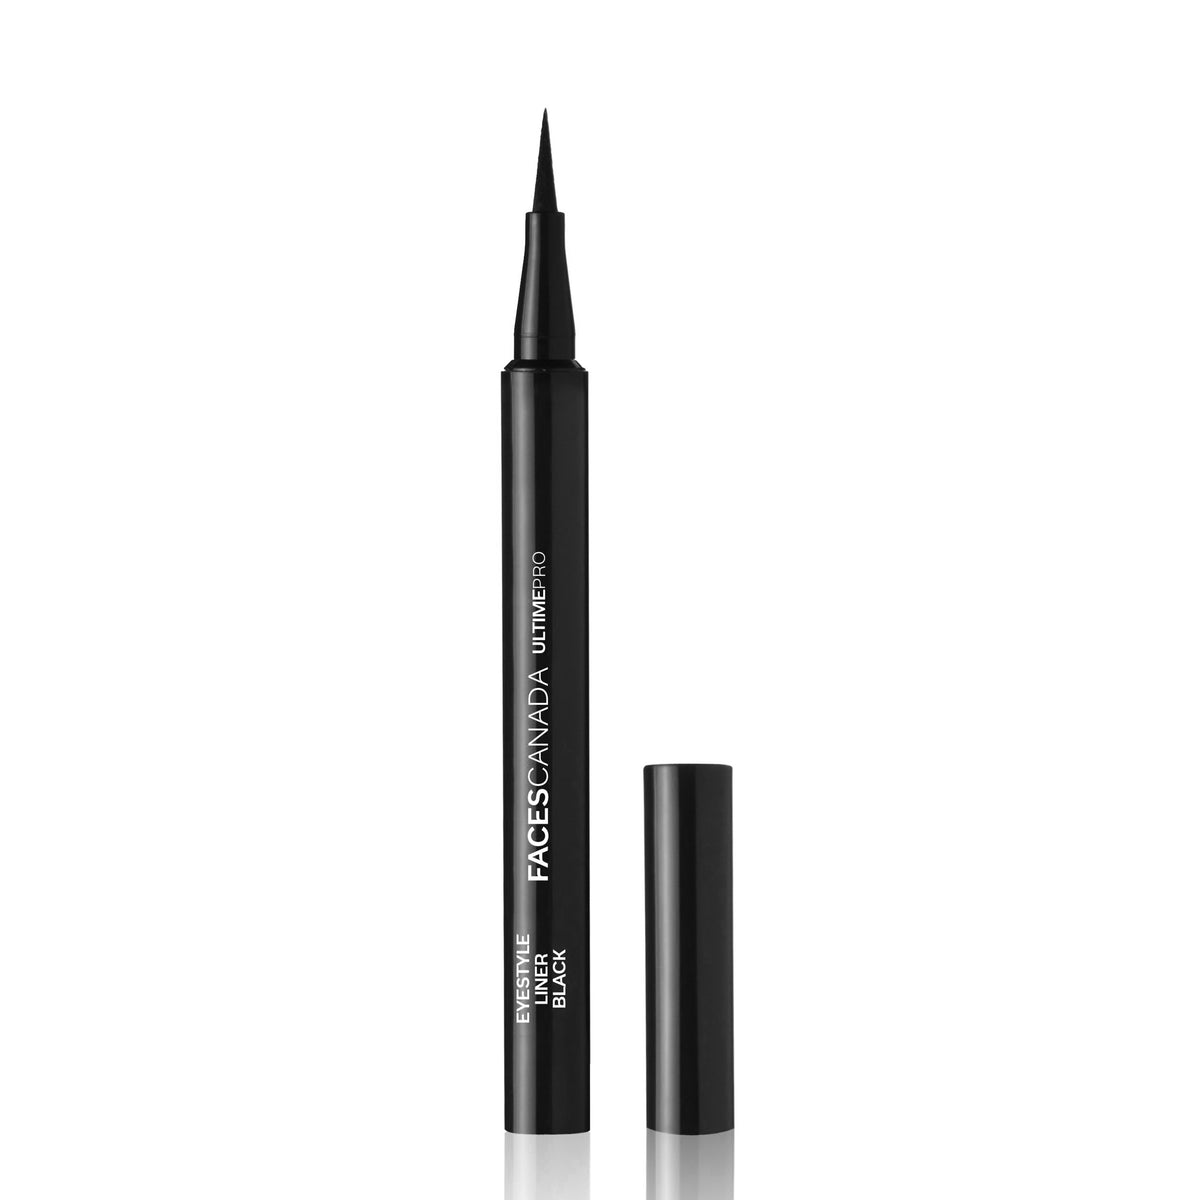 Faces Canada Ultime Pro Eyestyle Liner Black (1 ml) Faces Canada